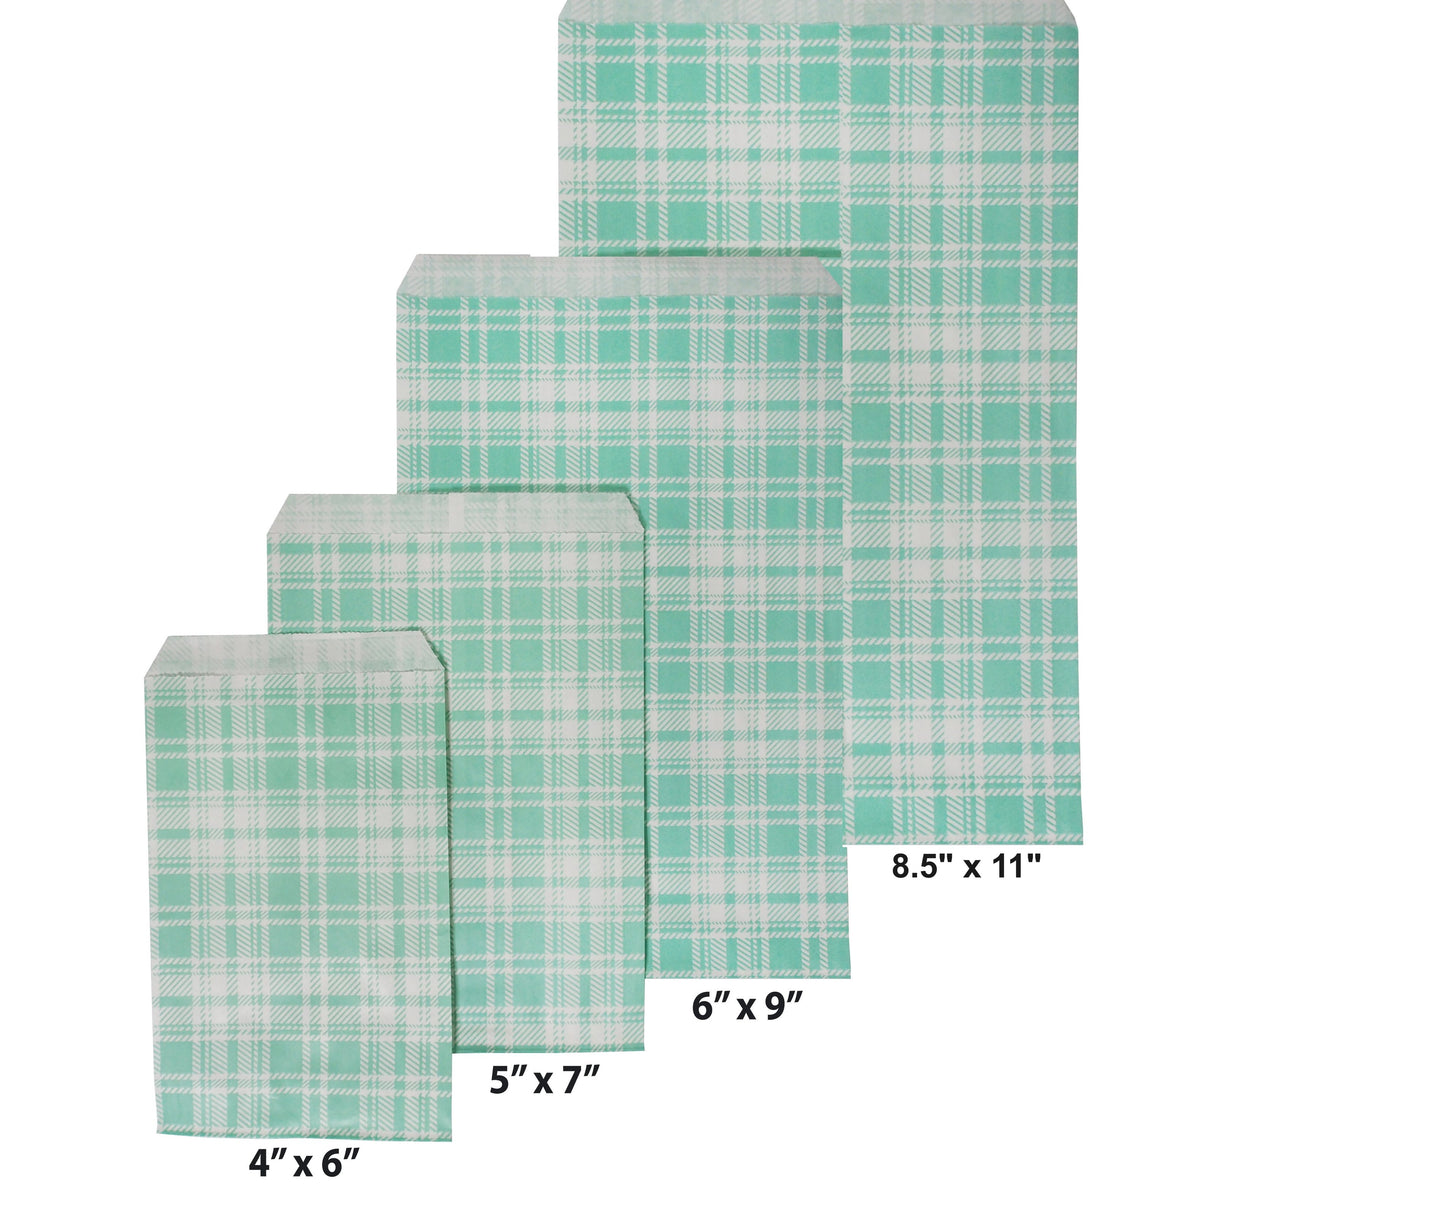 Mixed Plaid Pattern Flat Paper Gift Bags for Retail, Packaging, Party Favors, Merchandise, Crafts, Holidays, Weddings, and more.